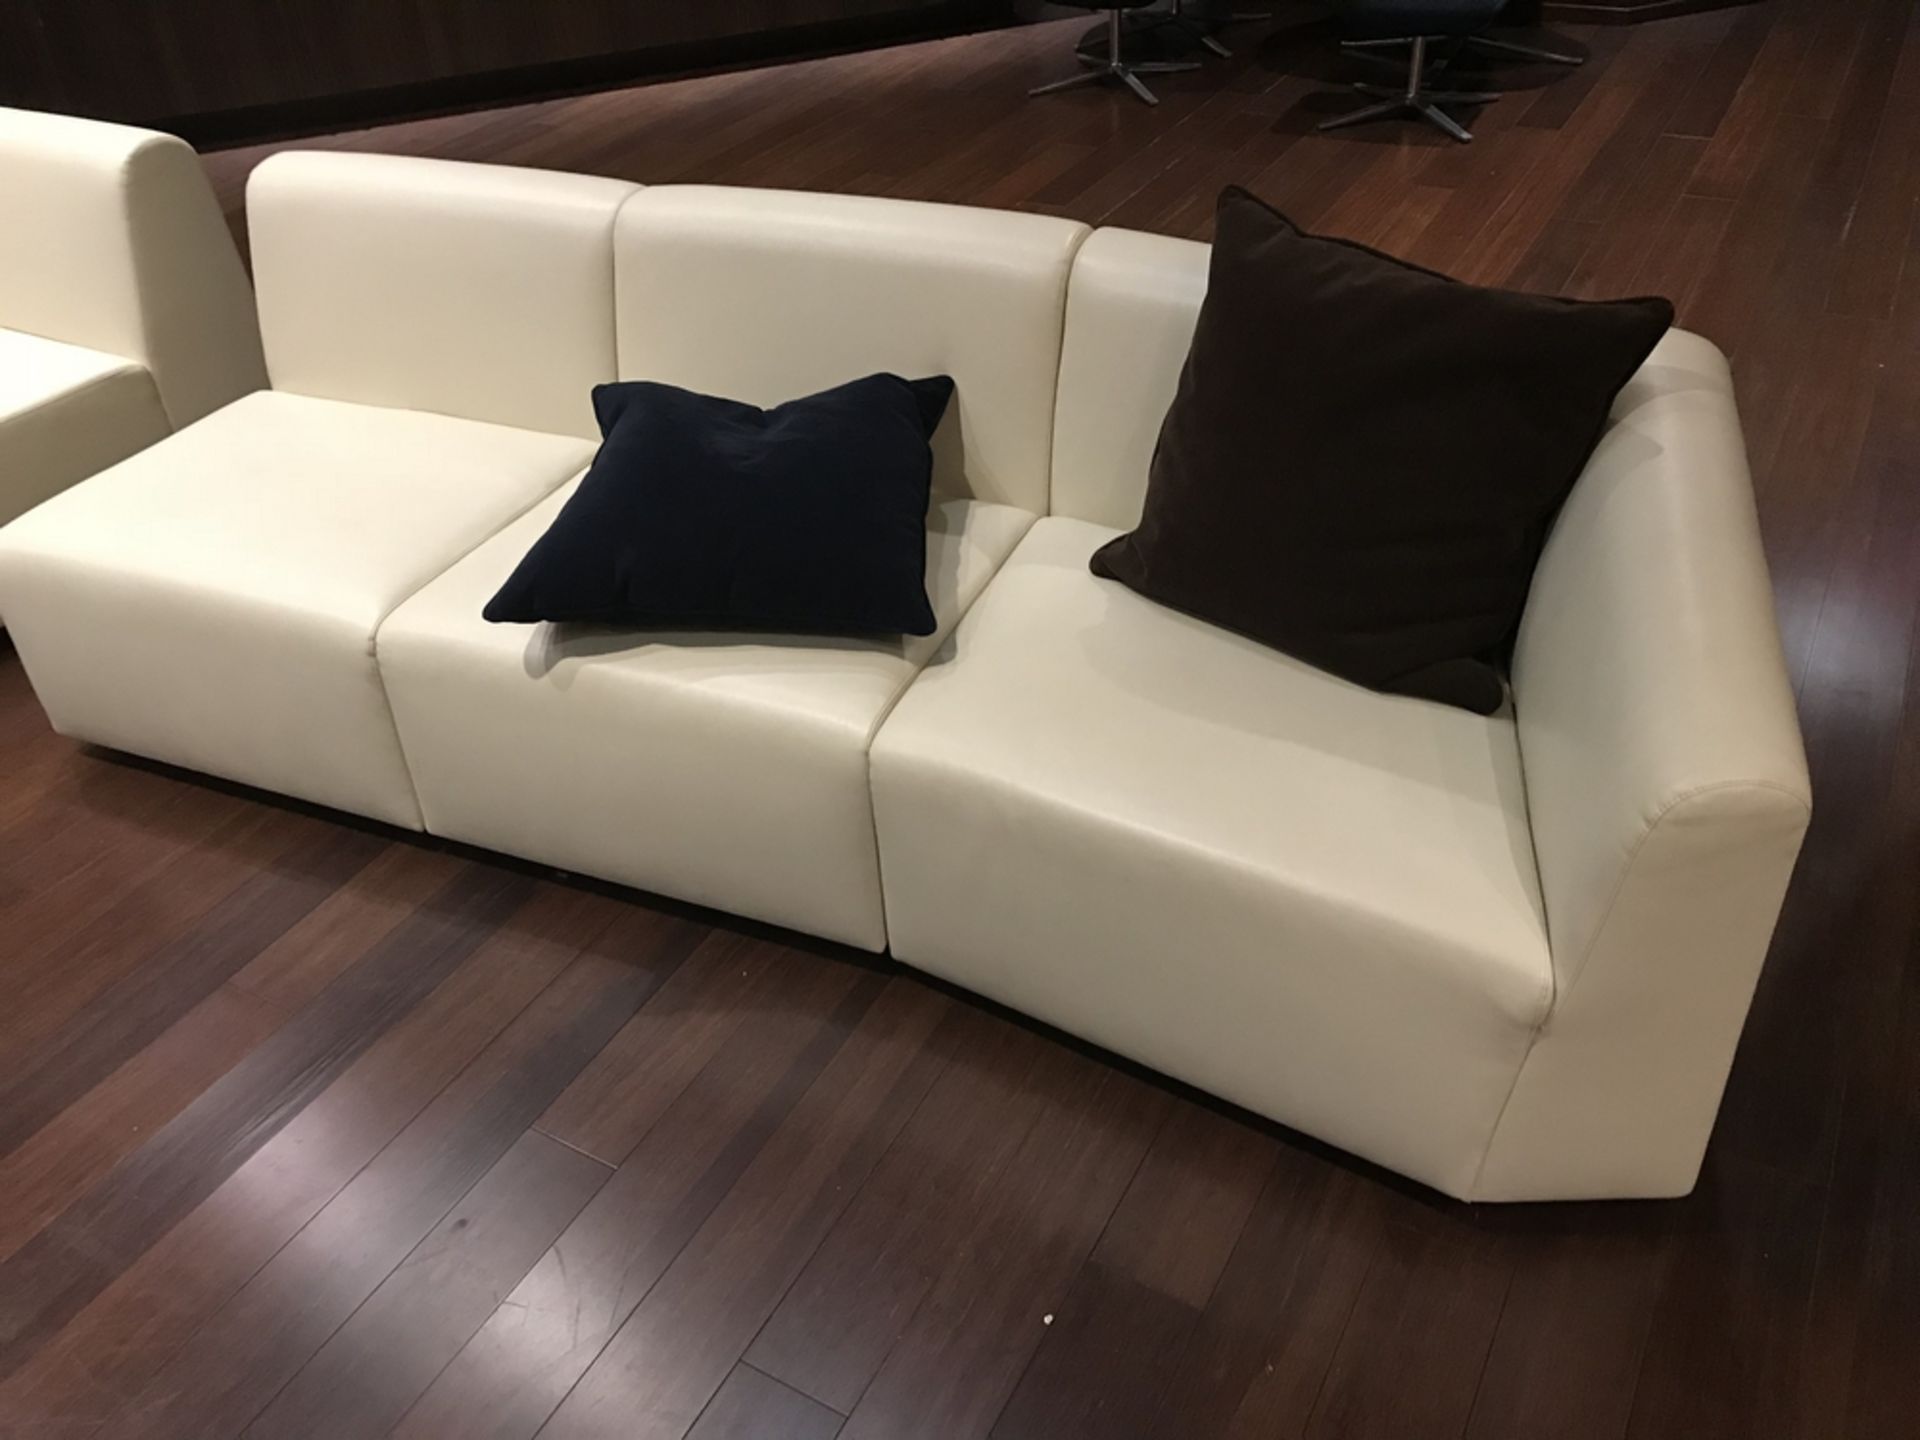 Off-White Couch Sectional (3 pc) , Dim. 120 l x 29 h x 33 , Location: Players Lounge ***Note from